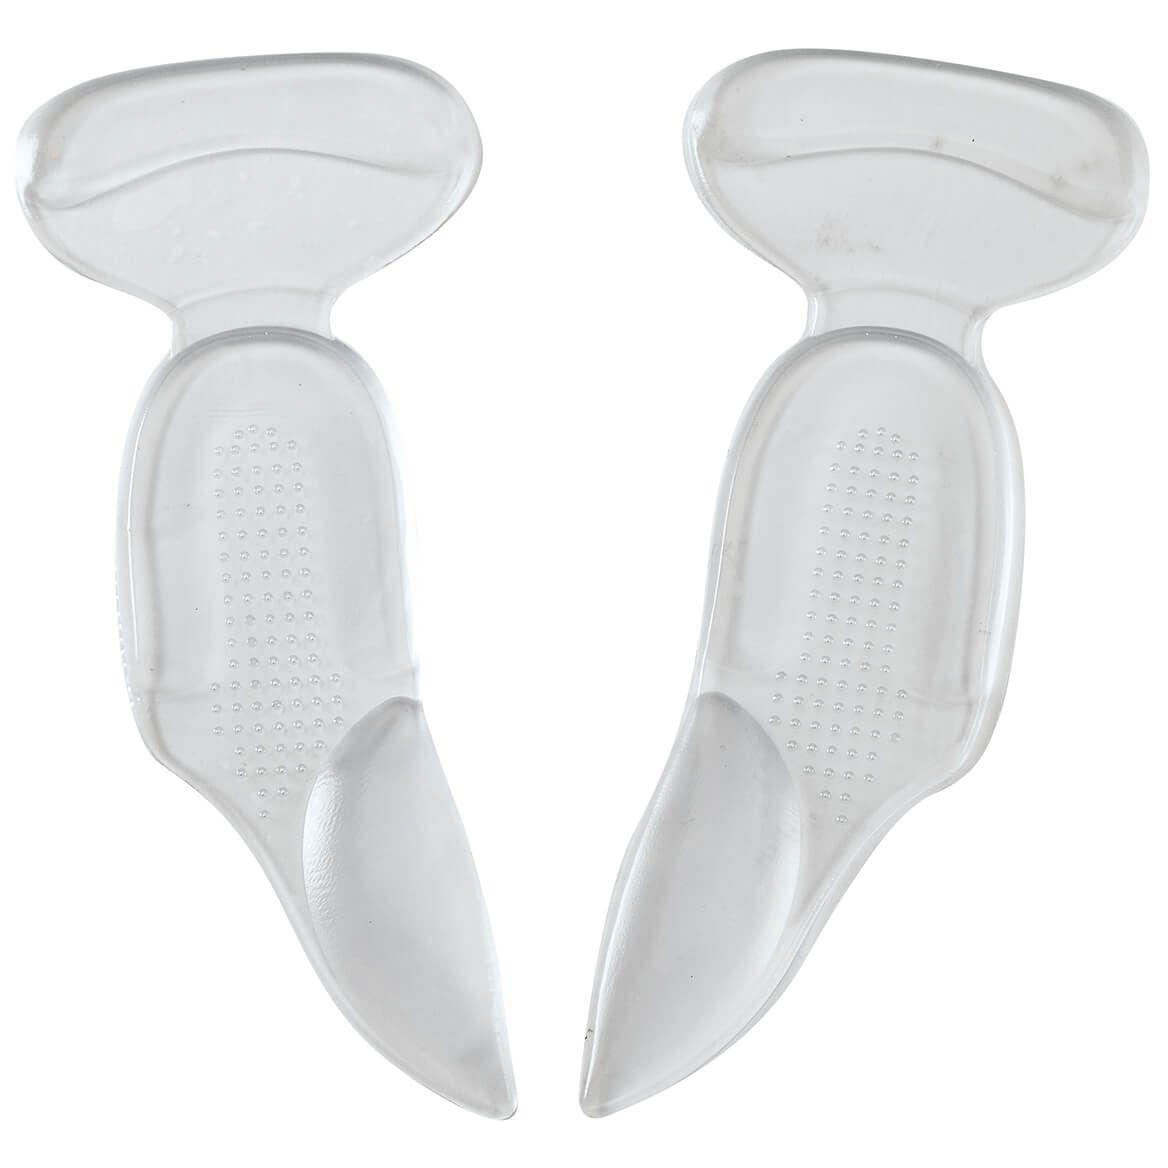 Blister Saver Heel and Arch Supports + '-' + 372877